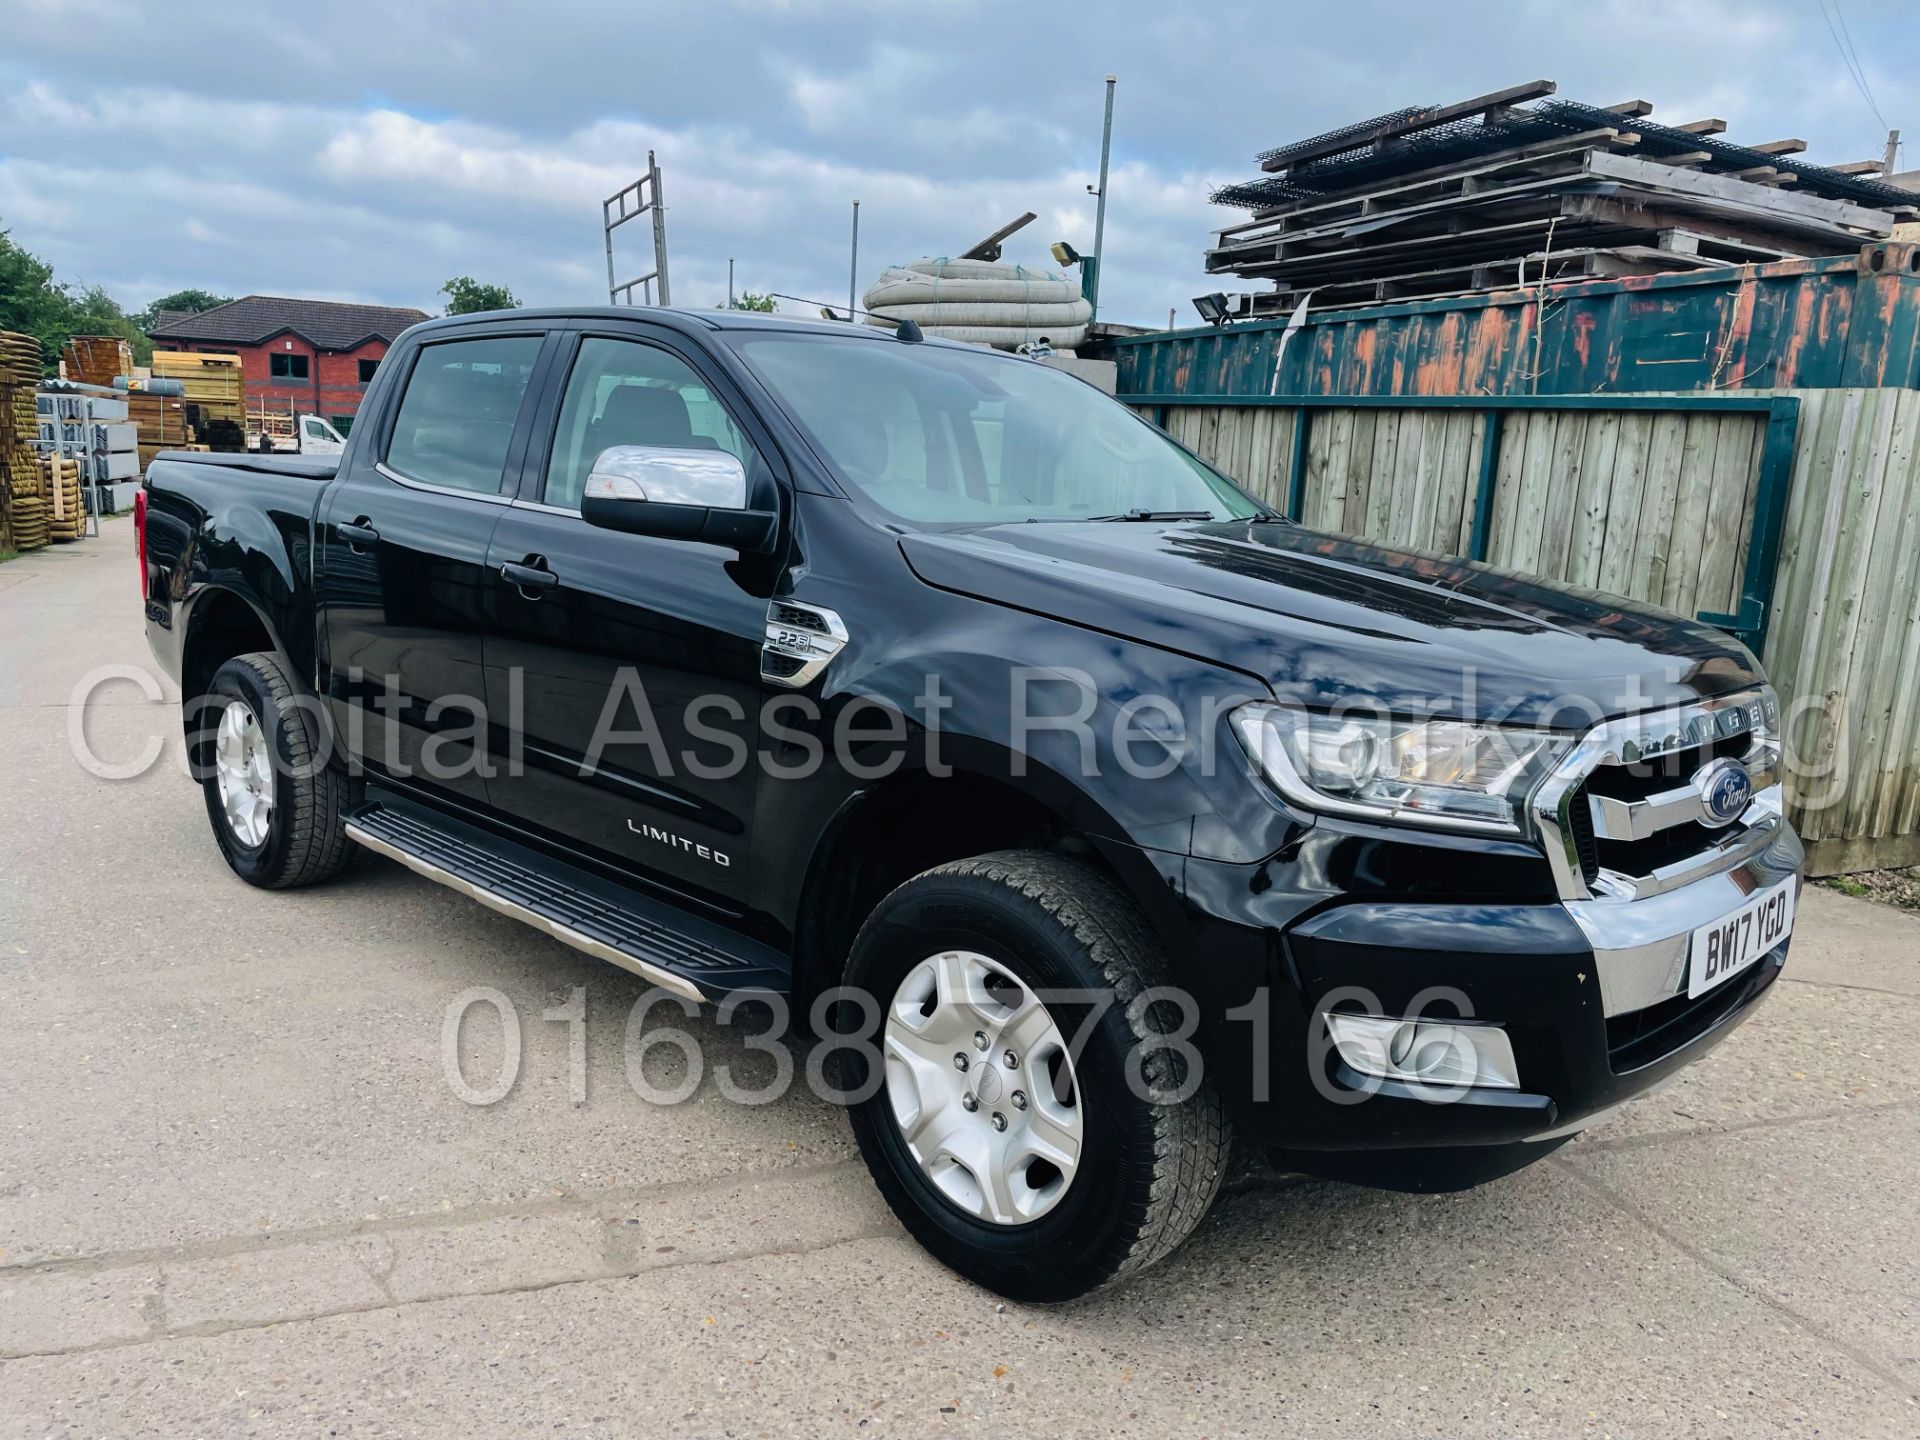 (On Sale) FORD RANGER *LIMITED EDITION* DOUBLE CAB PICK-UP (2017 -EURO 6) 'AUTO - LEATHER' (1 OWNER) - Image 3 of 56